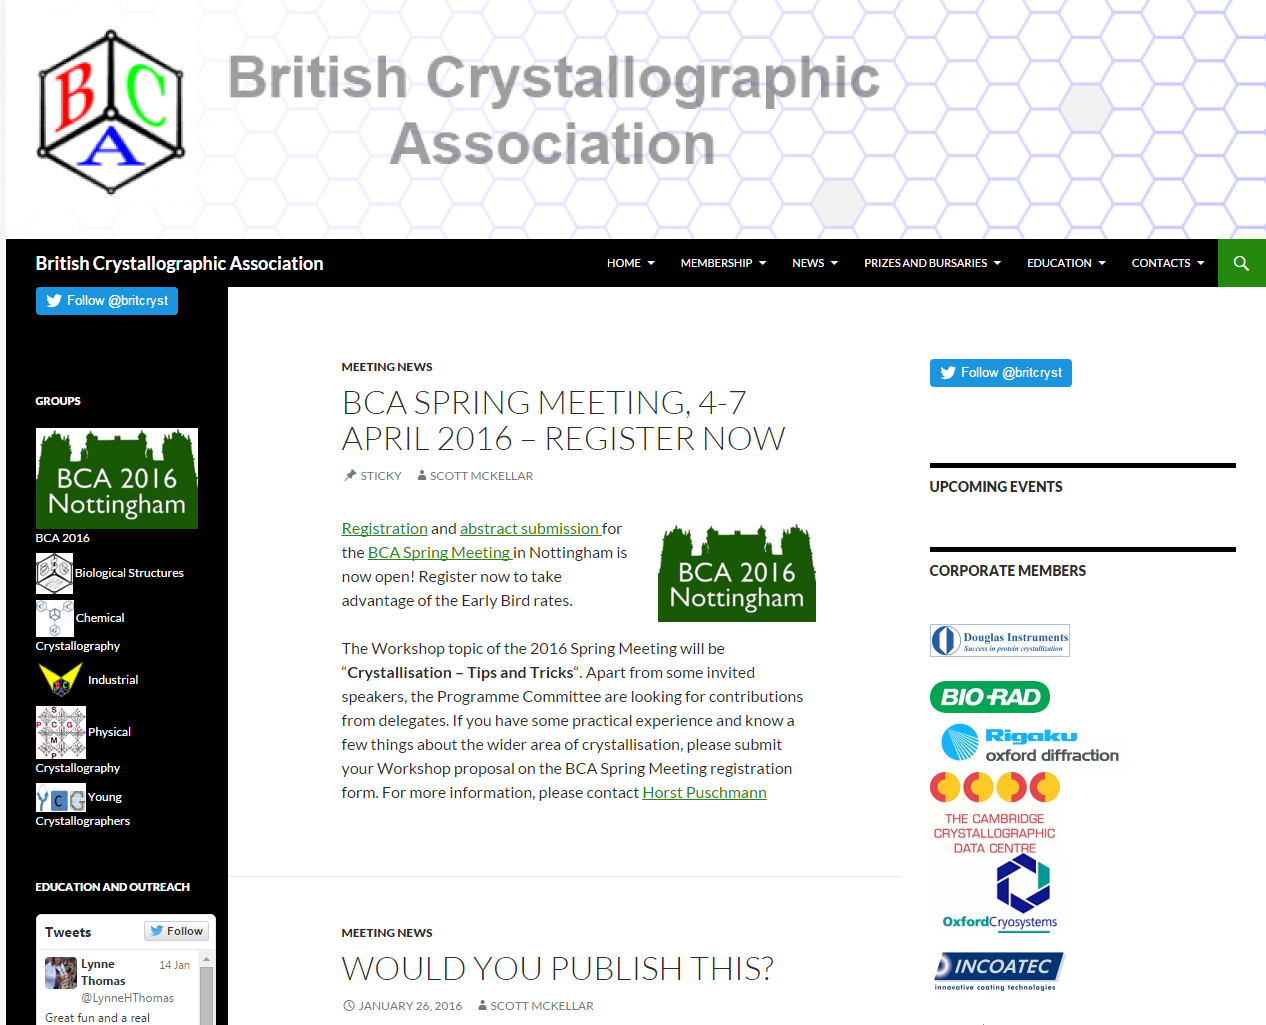 http://www.crystallography.org.uk/